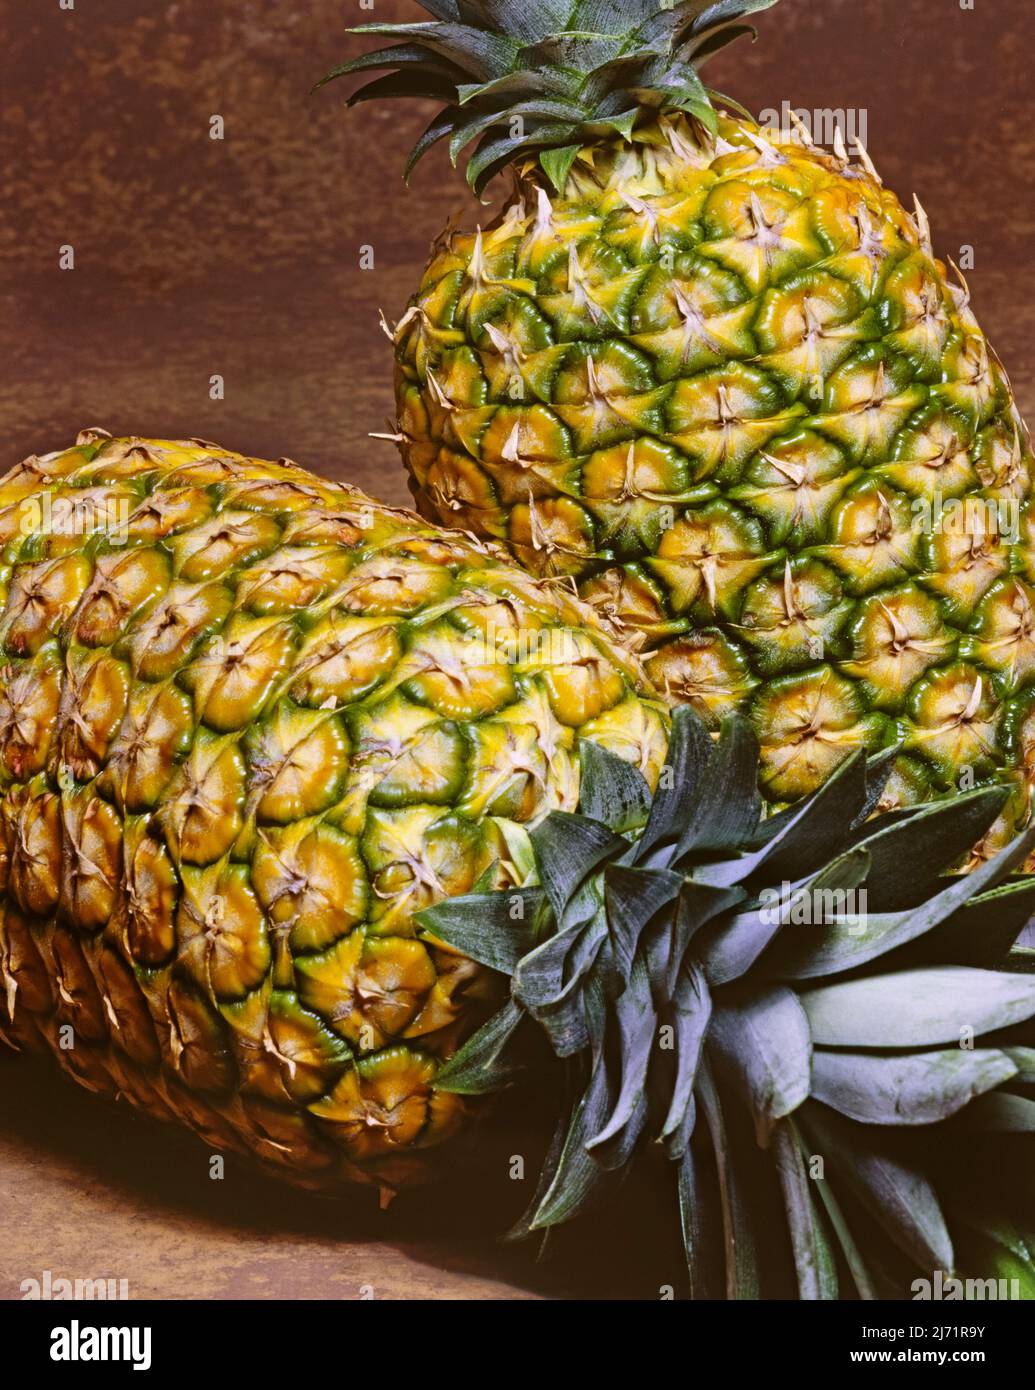 Two ripe Pineapples on brown background. Image from 4x5 inch film transparency. Stock Photo